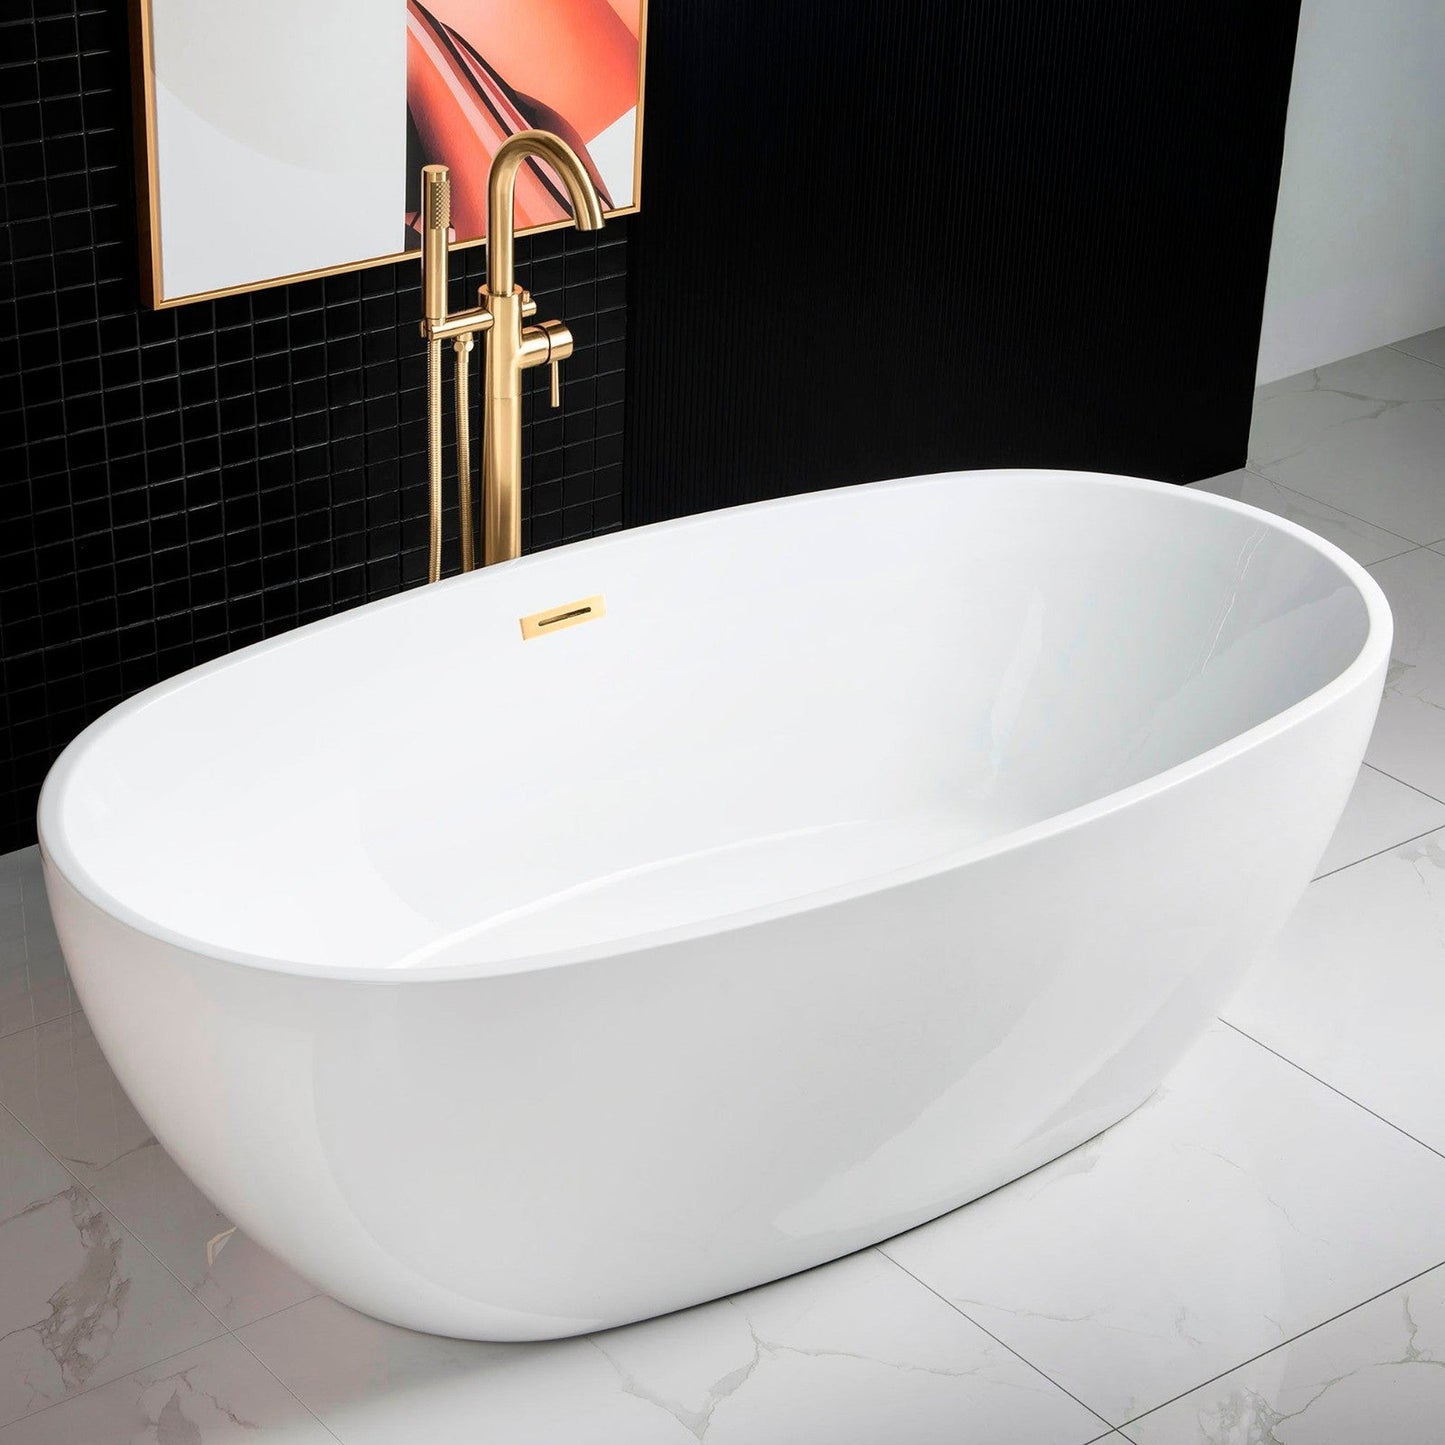 WoodBridge B0028 67" White Acrylic Freestanding Soaking Bathtub With Brushed Gold Drain, Overflow, F0073BGVT Tub Filler and Caddy Tray